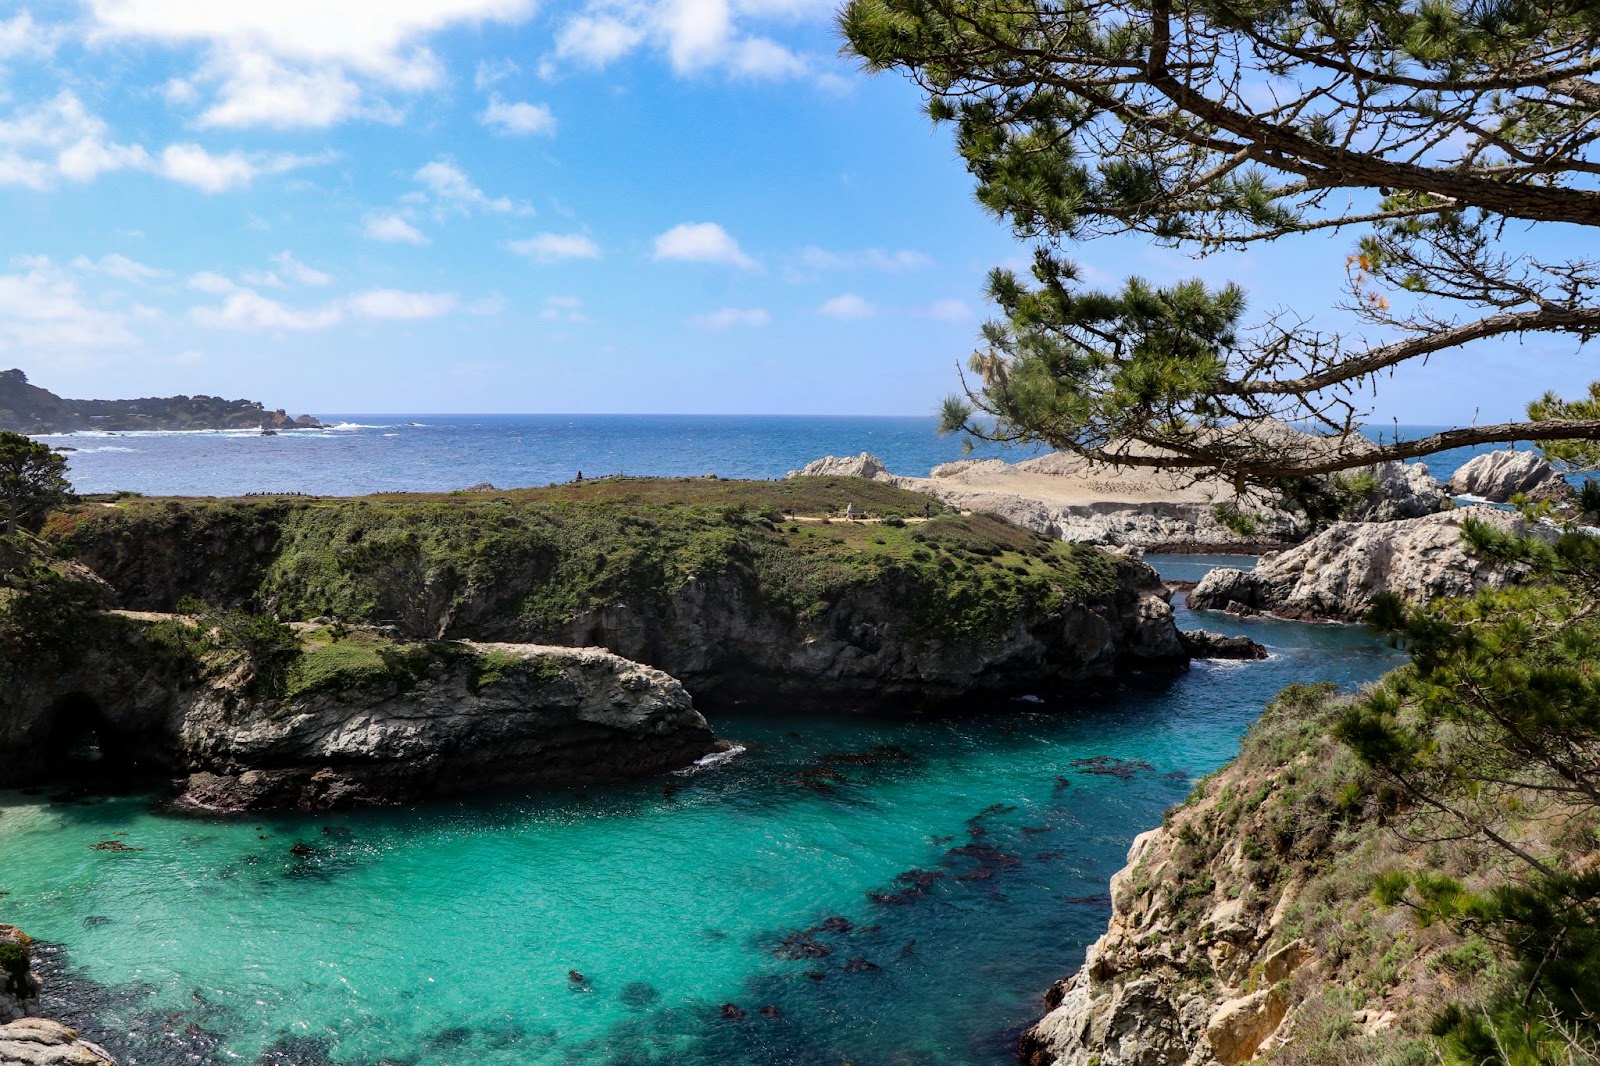 Two must-see spots on Highway 1